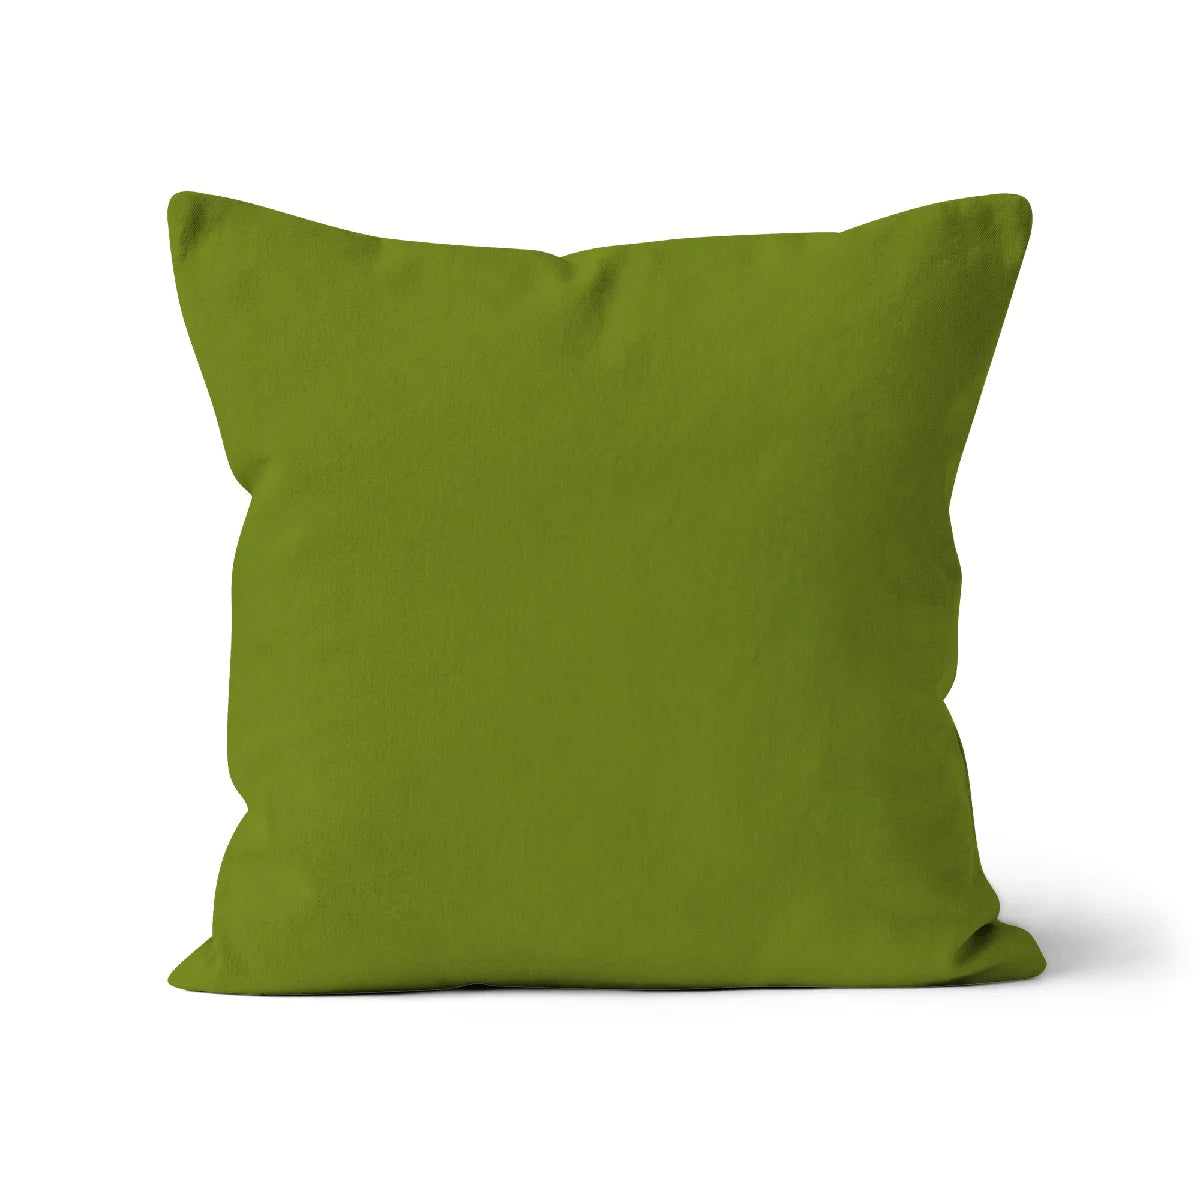 Olive green organic cotton cover. eco friendly inks. Square cushion cover. Made in Britian.